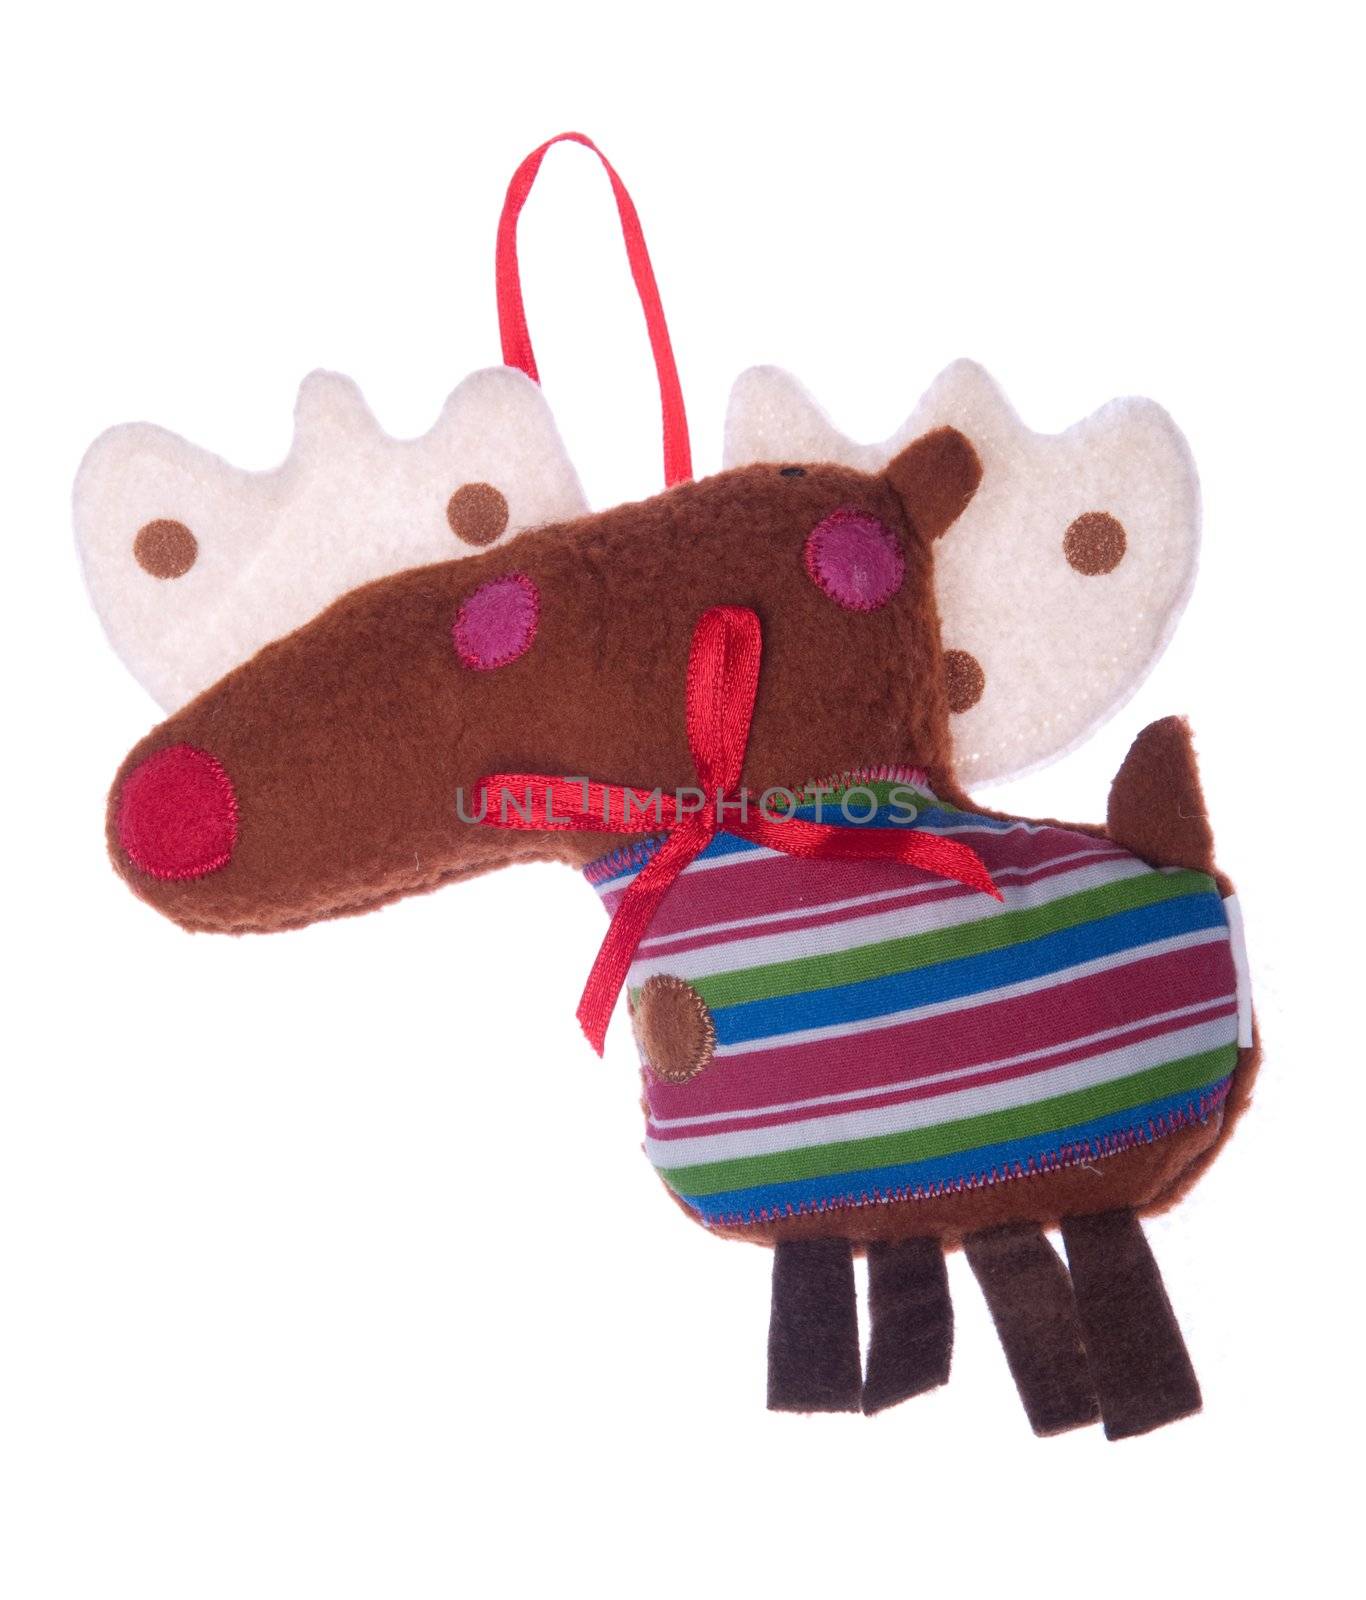 Reindeer, Christmas decoration (isolated on white background)